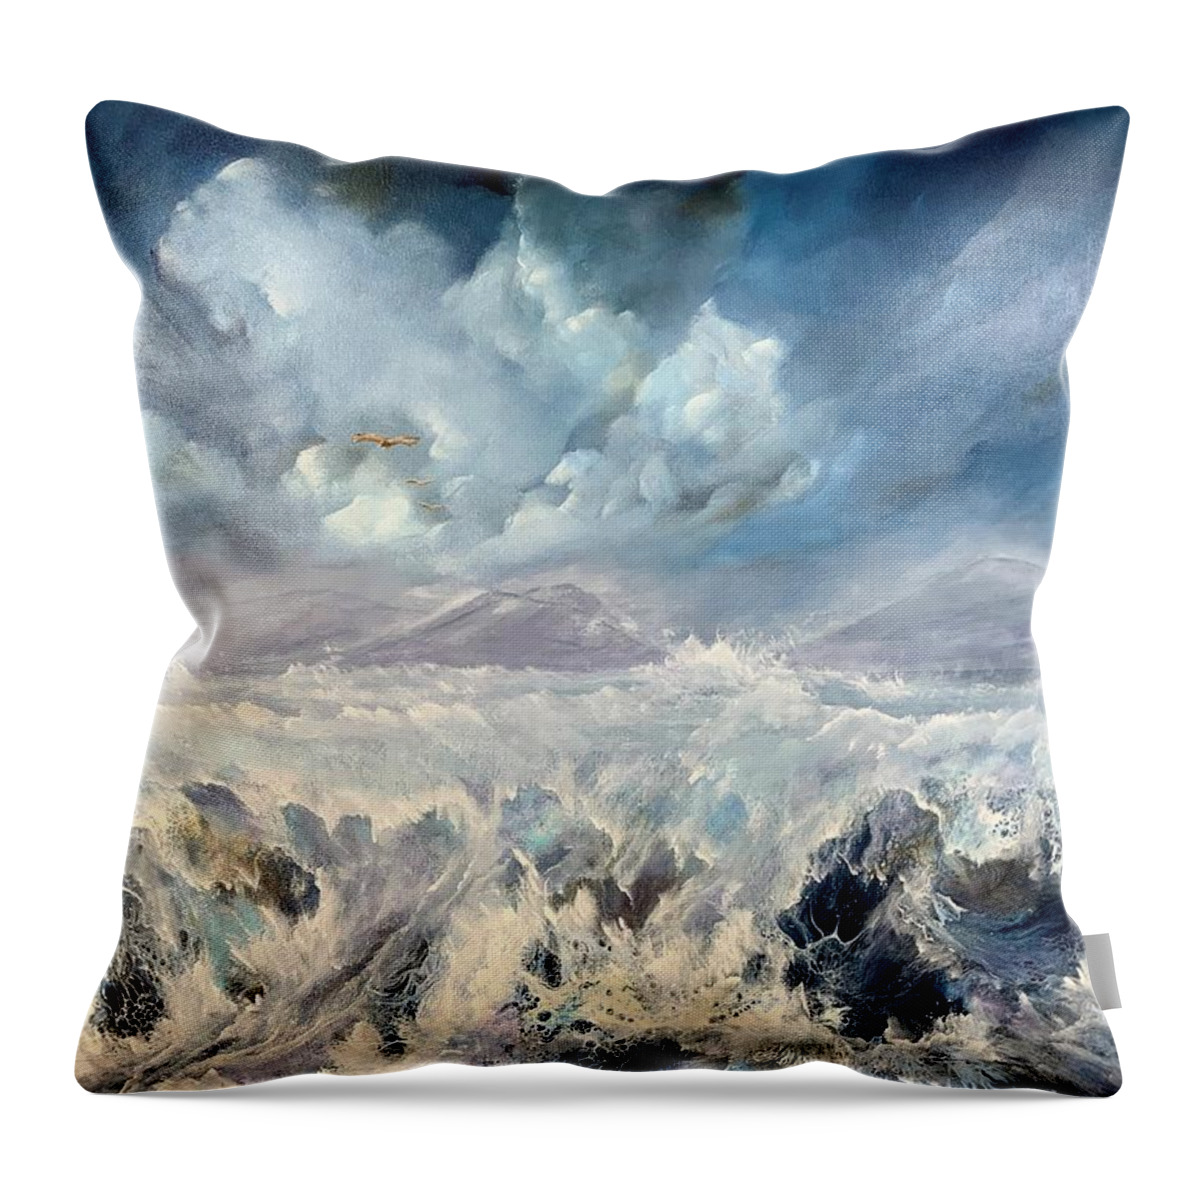 Acrylic Throw Pillow featuring the painting Tempest by Soraya Silvestri